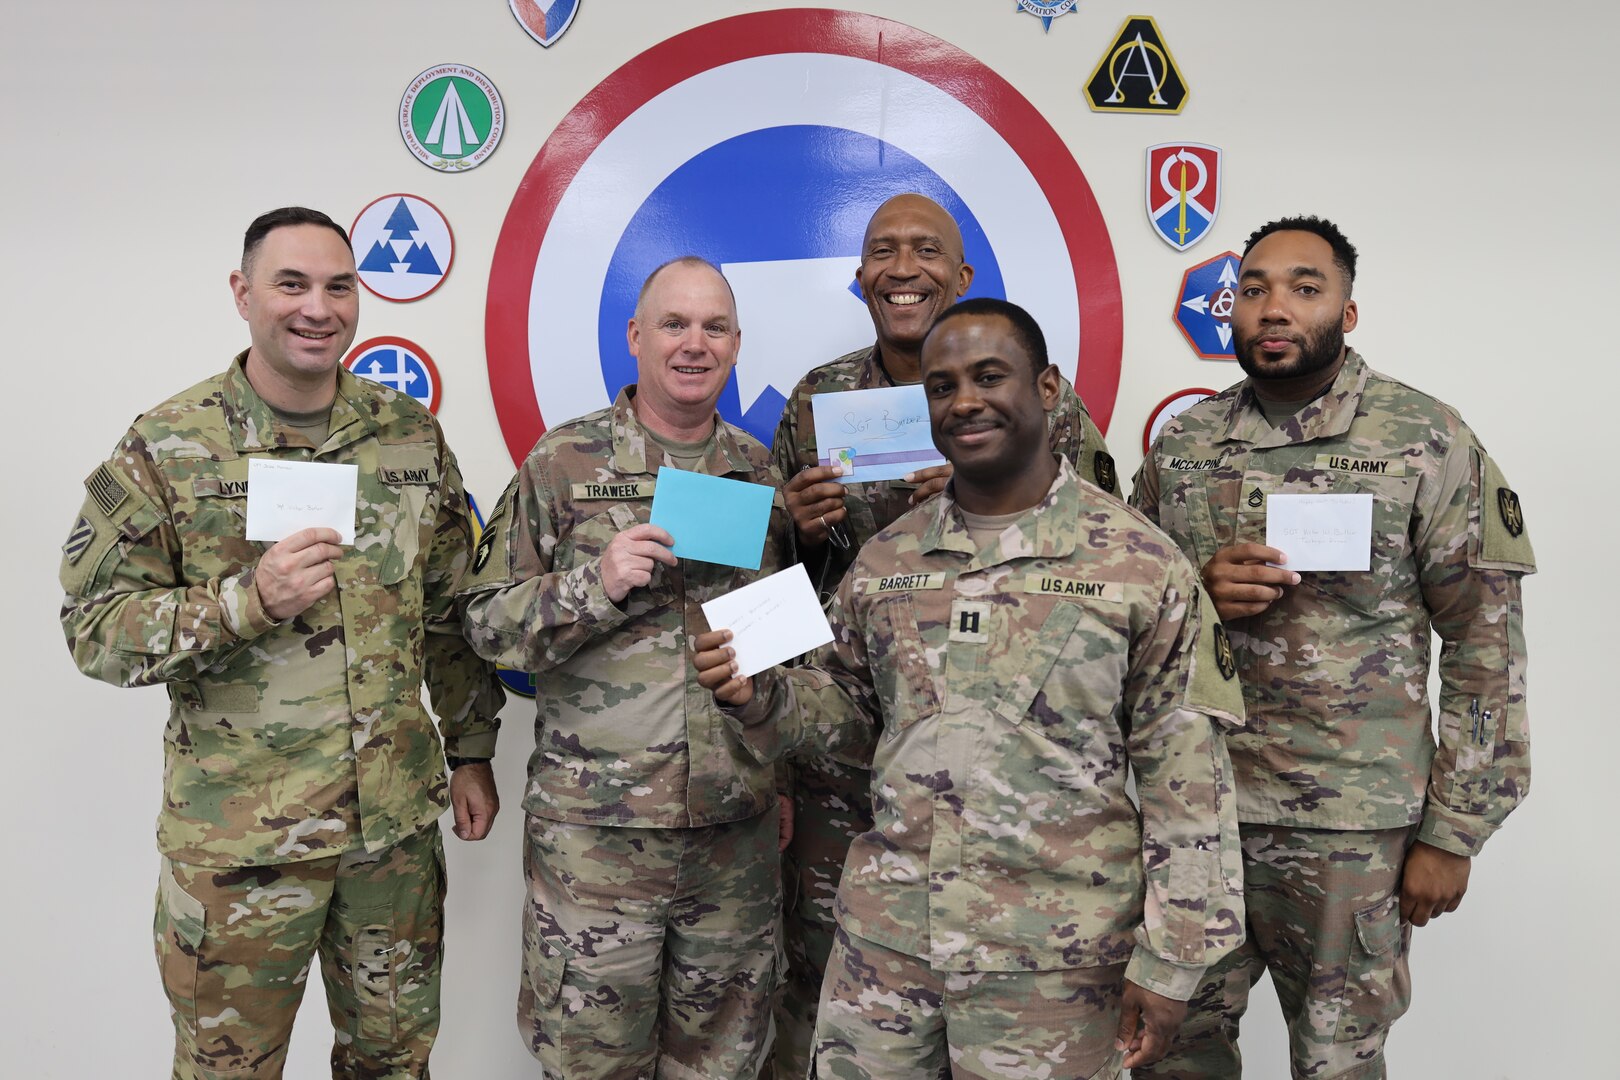 Five of the 135 Soldiers of the 135th Expeditionary Sustainment Command, Alabama National Guard, hold their birthday cards for one of the last known surviving Tuskegee Airman, Sgt. Victor Butler, who turns 100 May 21, 2022. Left to right, Sgt. 1st Class Brian Lynd, Lt. Col. Joel Traweek, Sgt. 1st Class Willie Vandiver, Capt. Jeremy Barrett, and Sgt. 1st Class Carnard McCalpine.